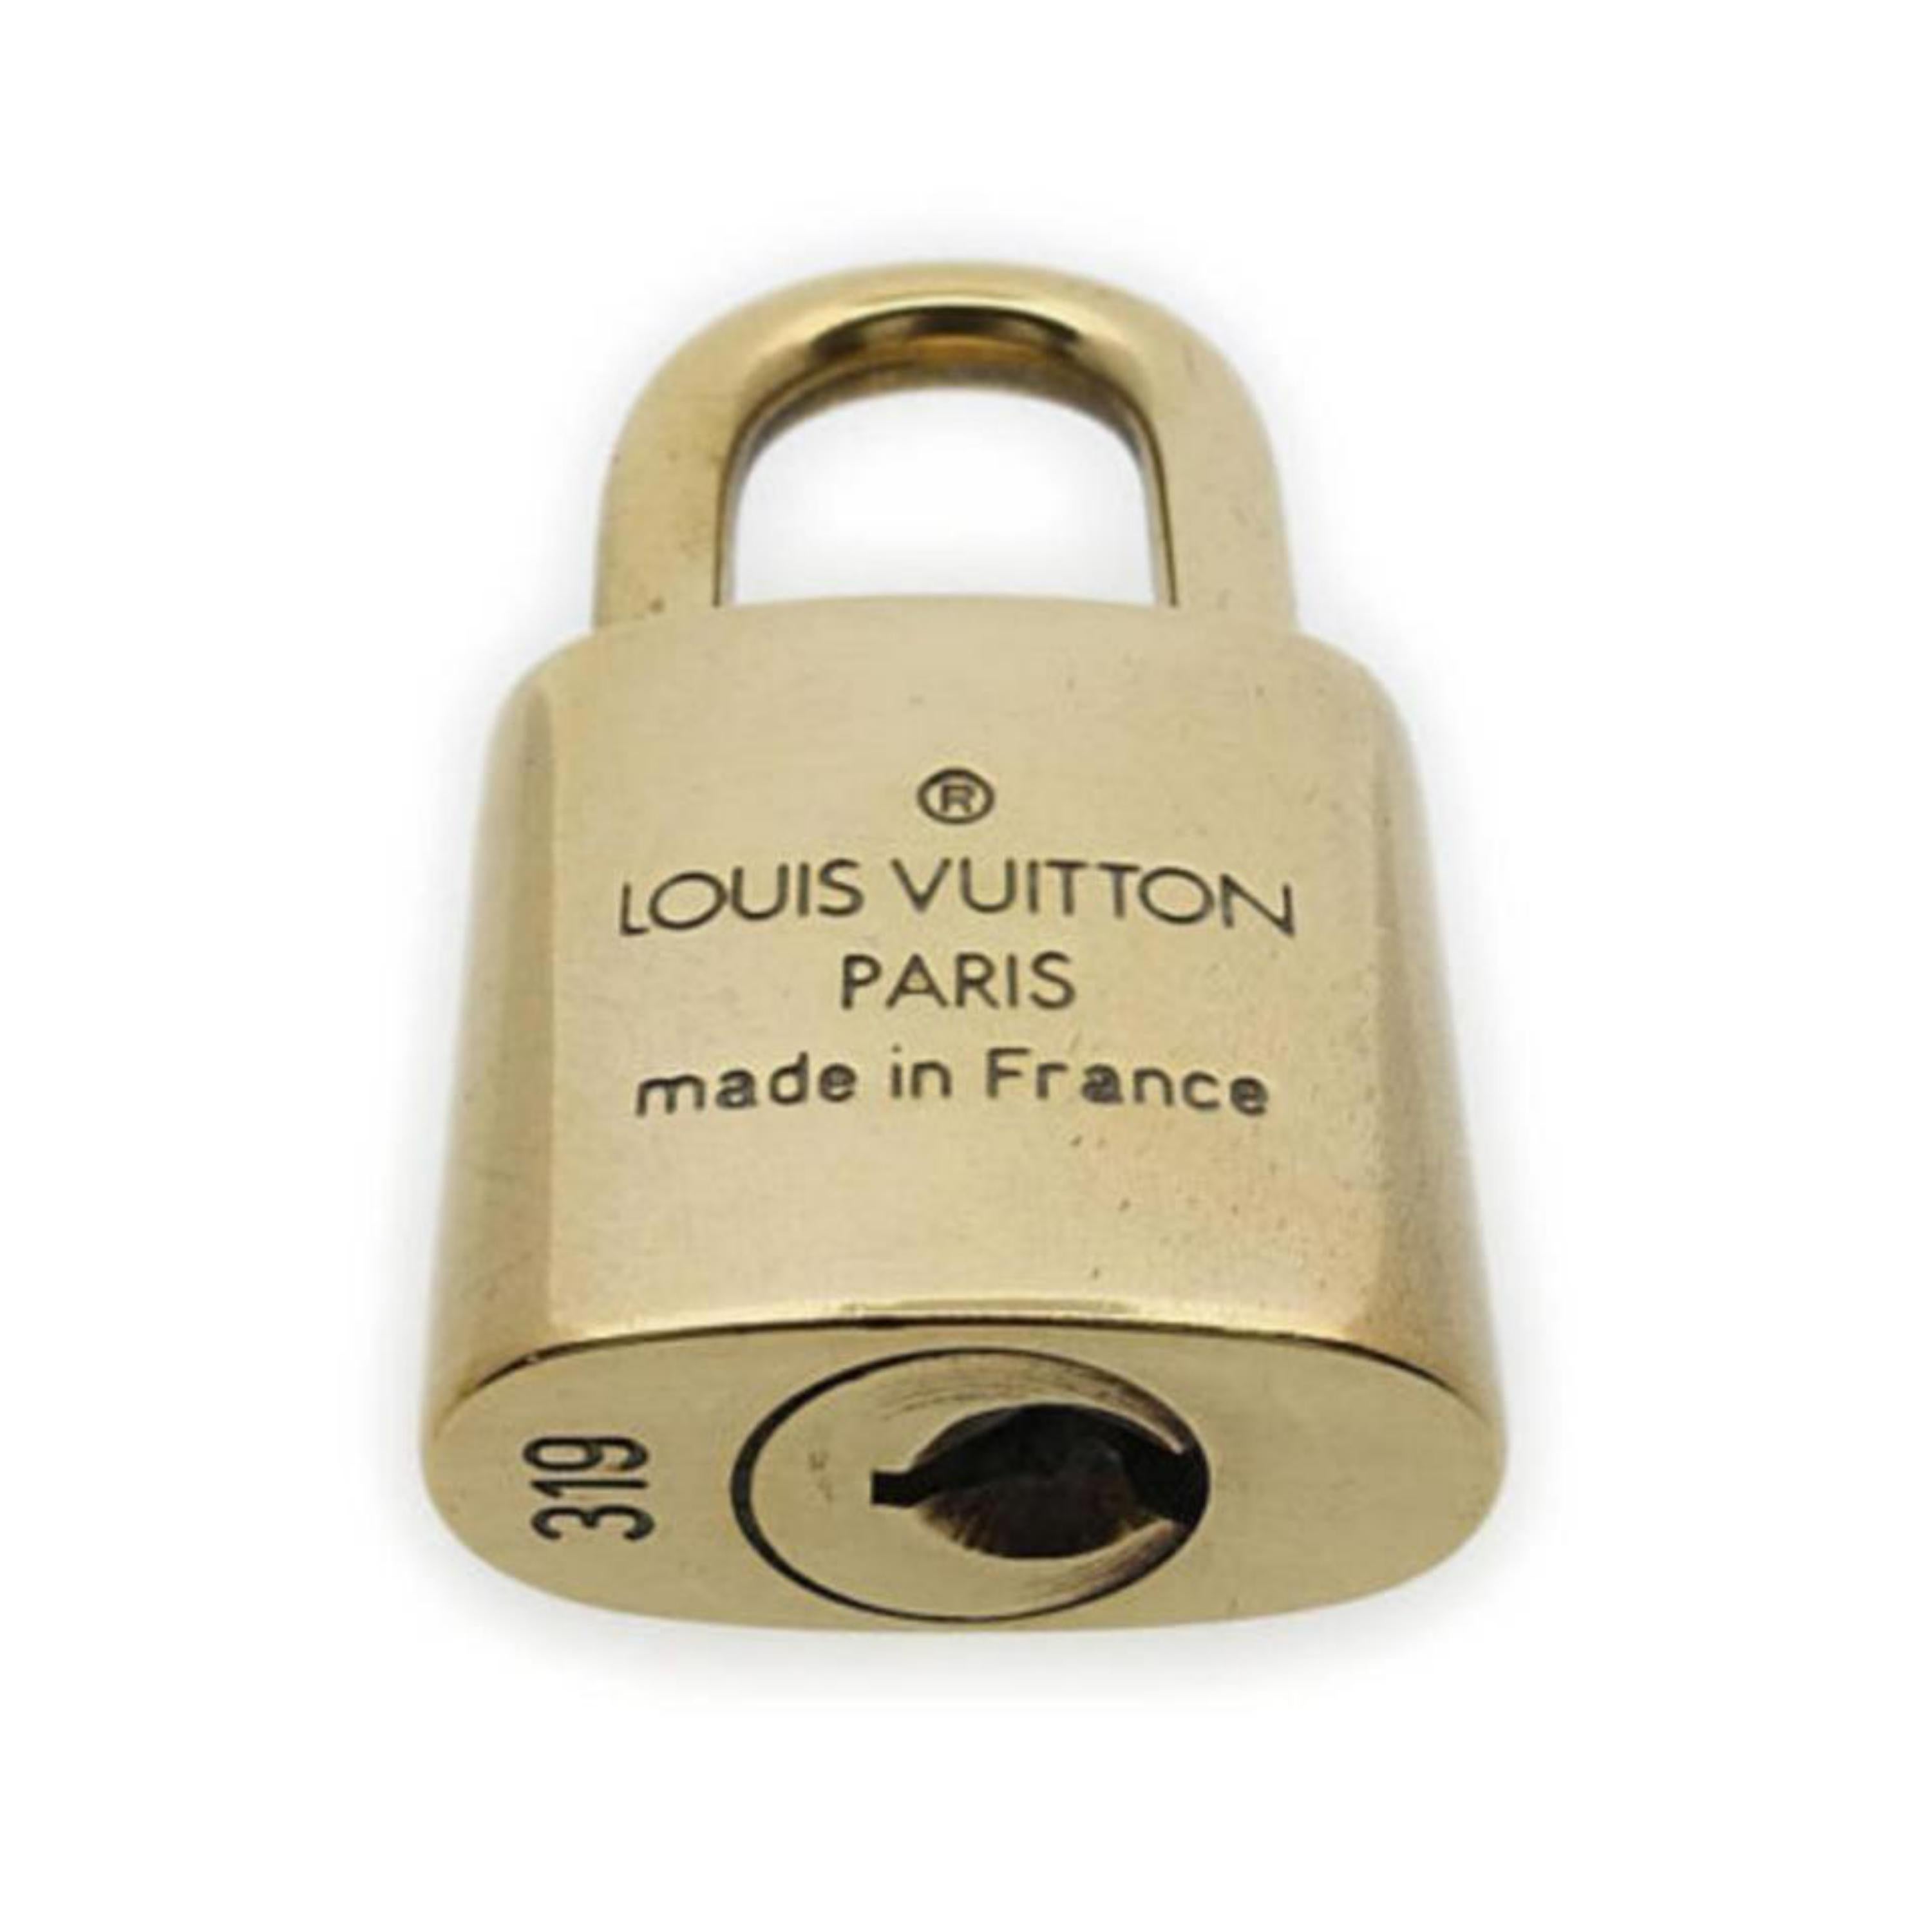 Lock Number may vary from photo 
2.1x3.8cm
Includes Lock and 1 Key
Some scratches, wear and tarnish.
Reminder you not choose the number.
ONLY ONE KEY IS INCLUDED.
Please review photos for more details. 
Color appearance may vary depending on your